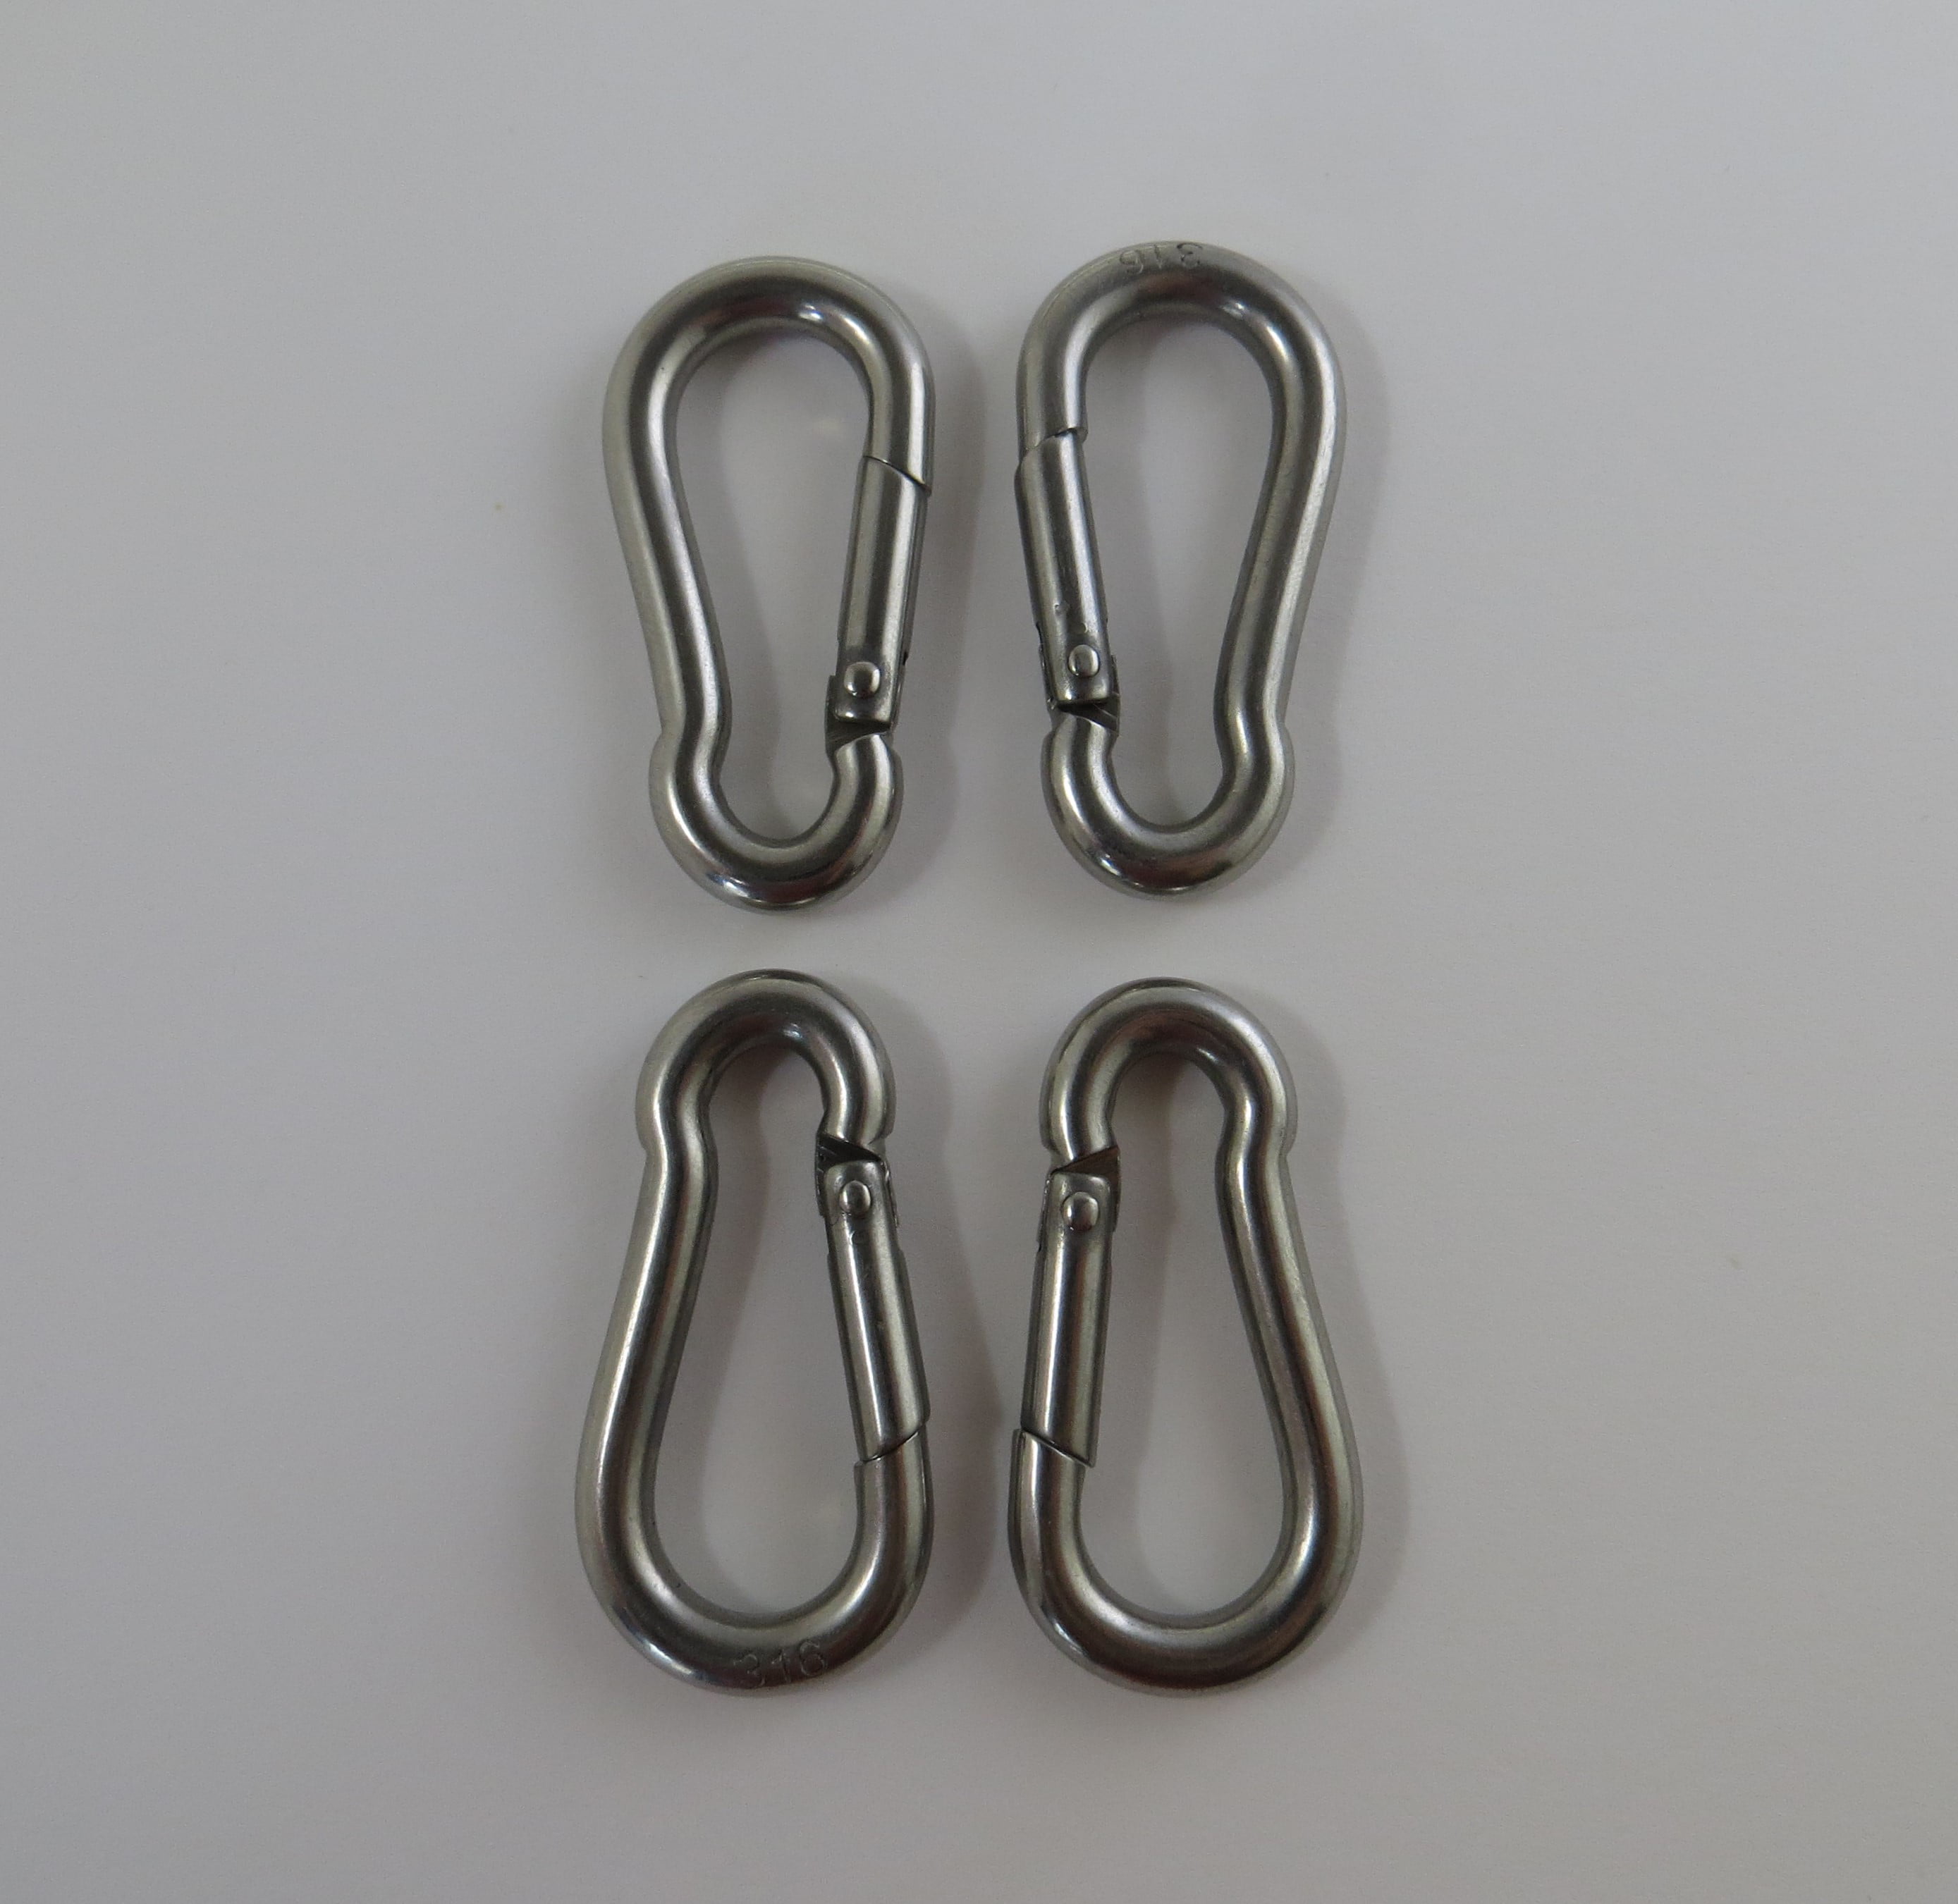 Carbine Hook with Screw Gate 50 mm Marine Grade Stainless Steel Pack of 1 pcs 1 